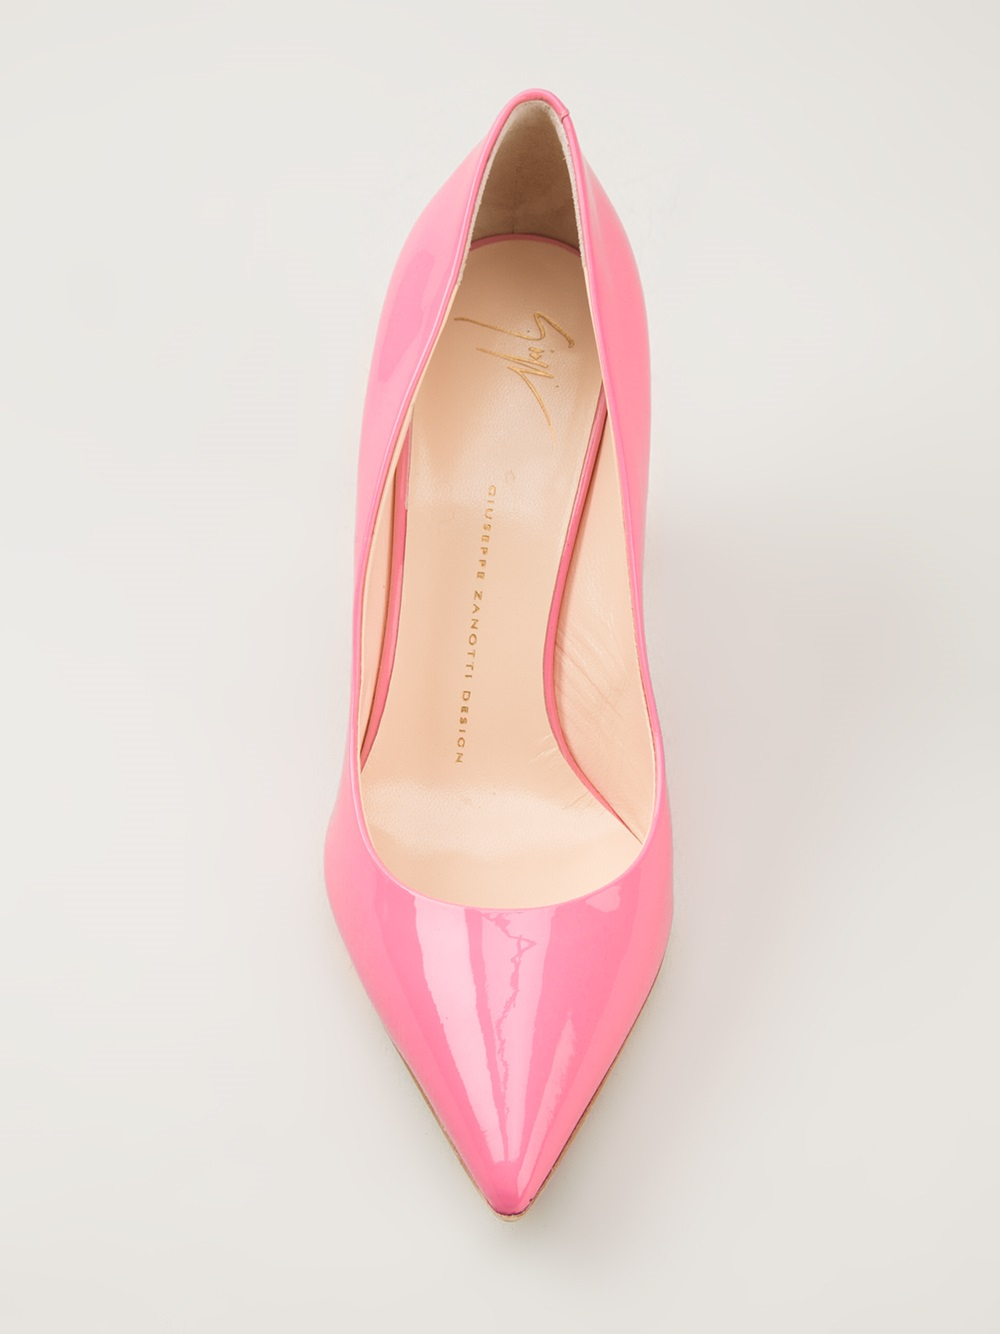 Giuseppe Zanotti Pointed Toe Pumps in Pink & Purple (Pink) - Lyst